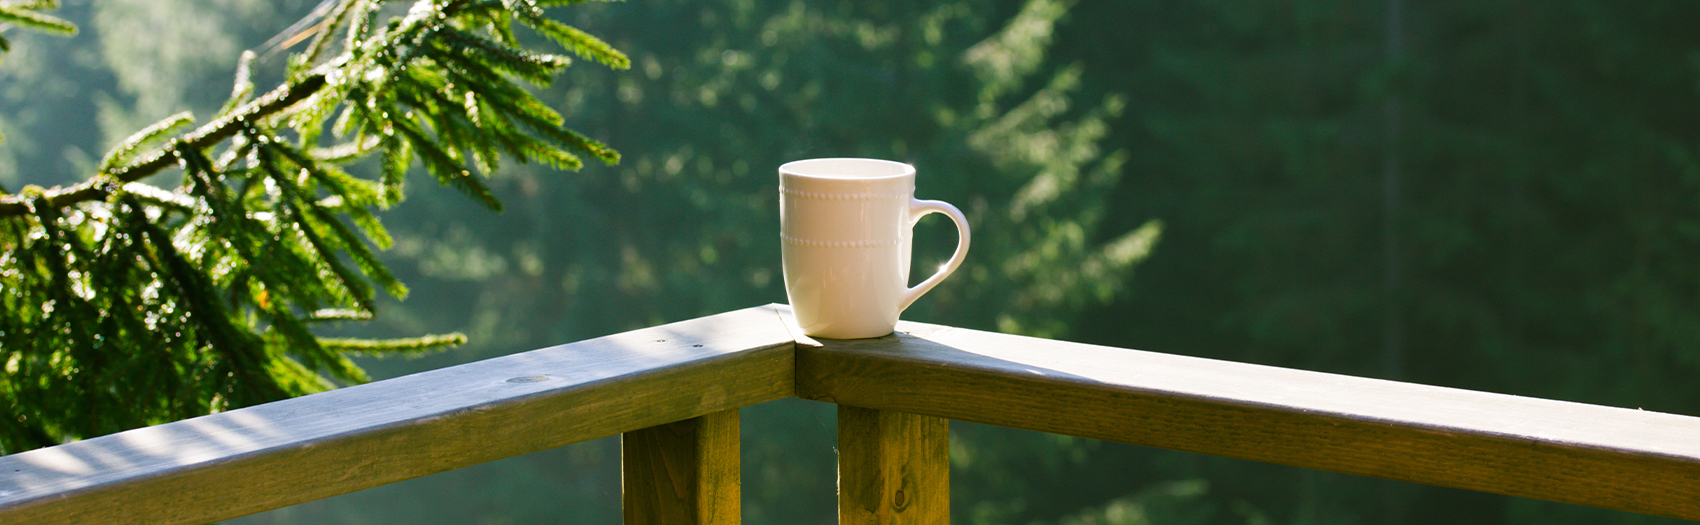 single coffee mug on railing outdoors with pine trees branches in background